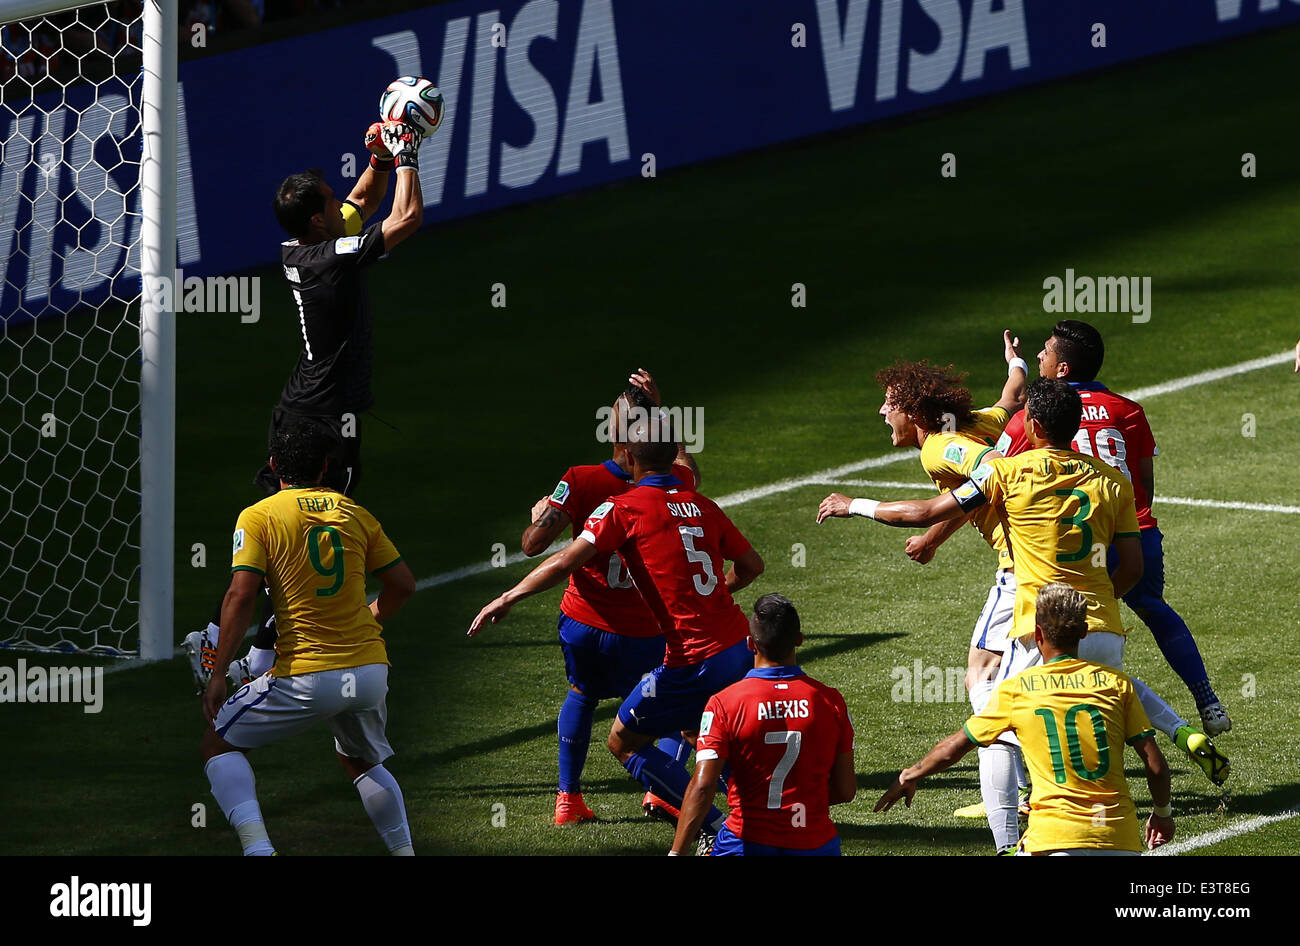 Belo Horizonte, Brazil. 28th June, 2014. Chile's goalkeeper Jorge Sampaoli (L, up) plucks the ball during a Round of 16 match between Brazil and Chile of 2014 FIFA World Cup at the Estadio Mineirao Stadium in Belo Horizonte, Brazil, on June 28, 2014. Credit:  Liu Bin/Xinhua/Alamy Live News Stock Photo